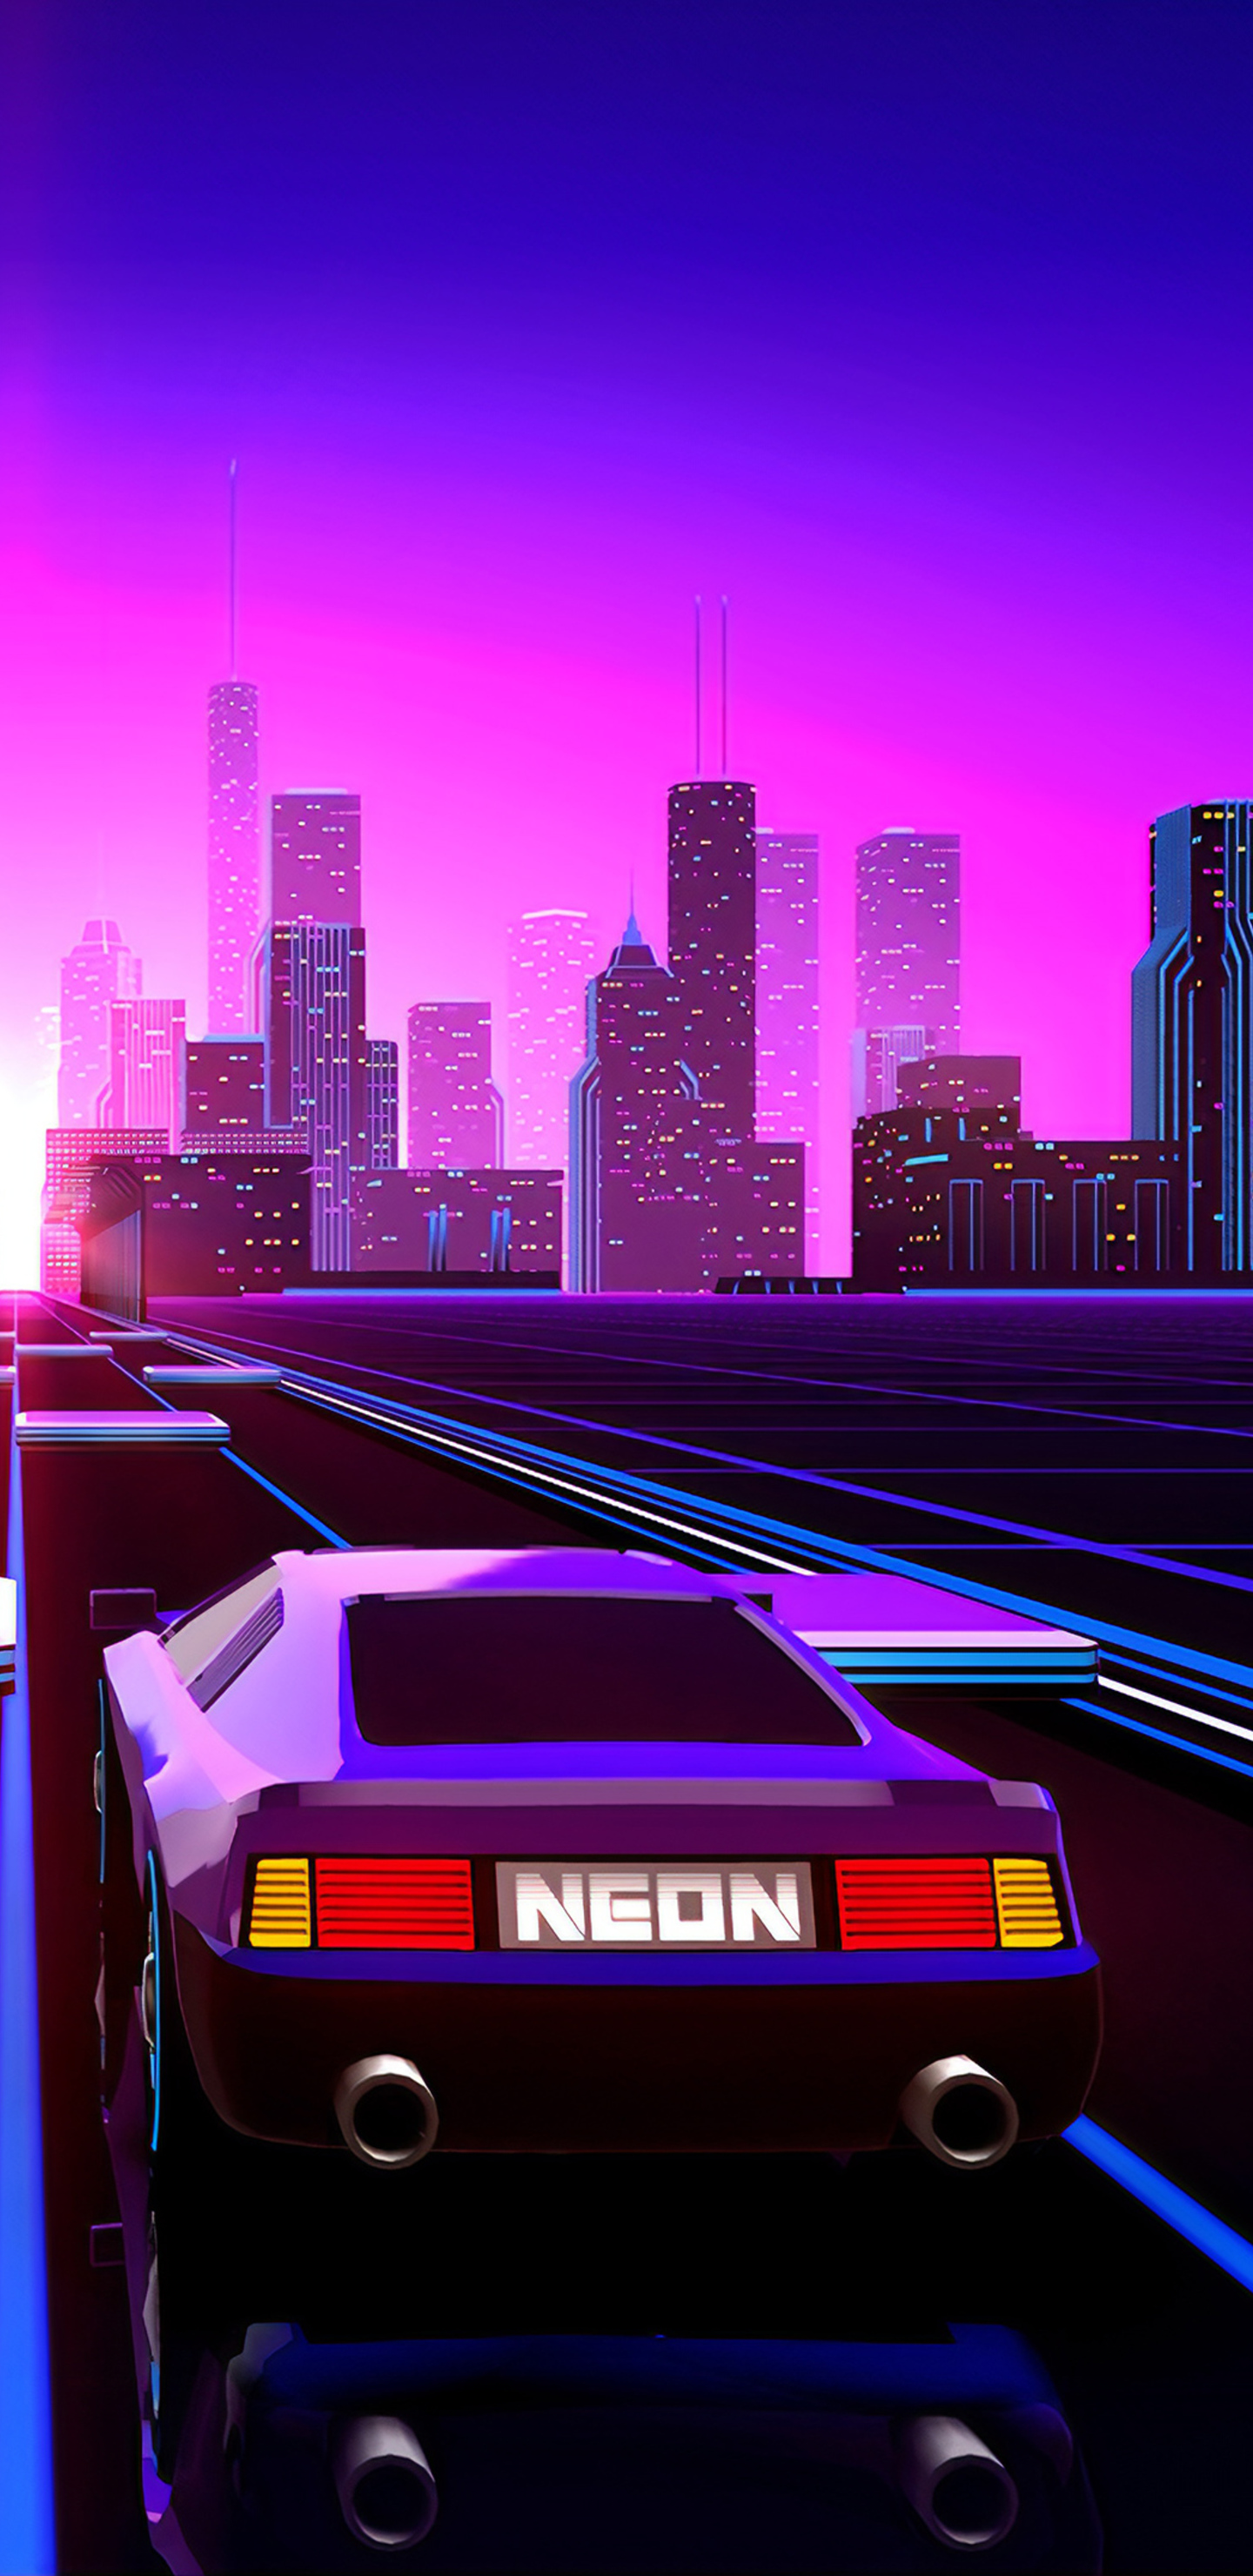 Way To Retrowave City In 1440x2960 Resolution. Cool wallpaper